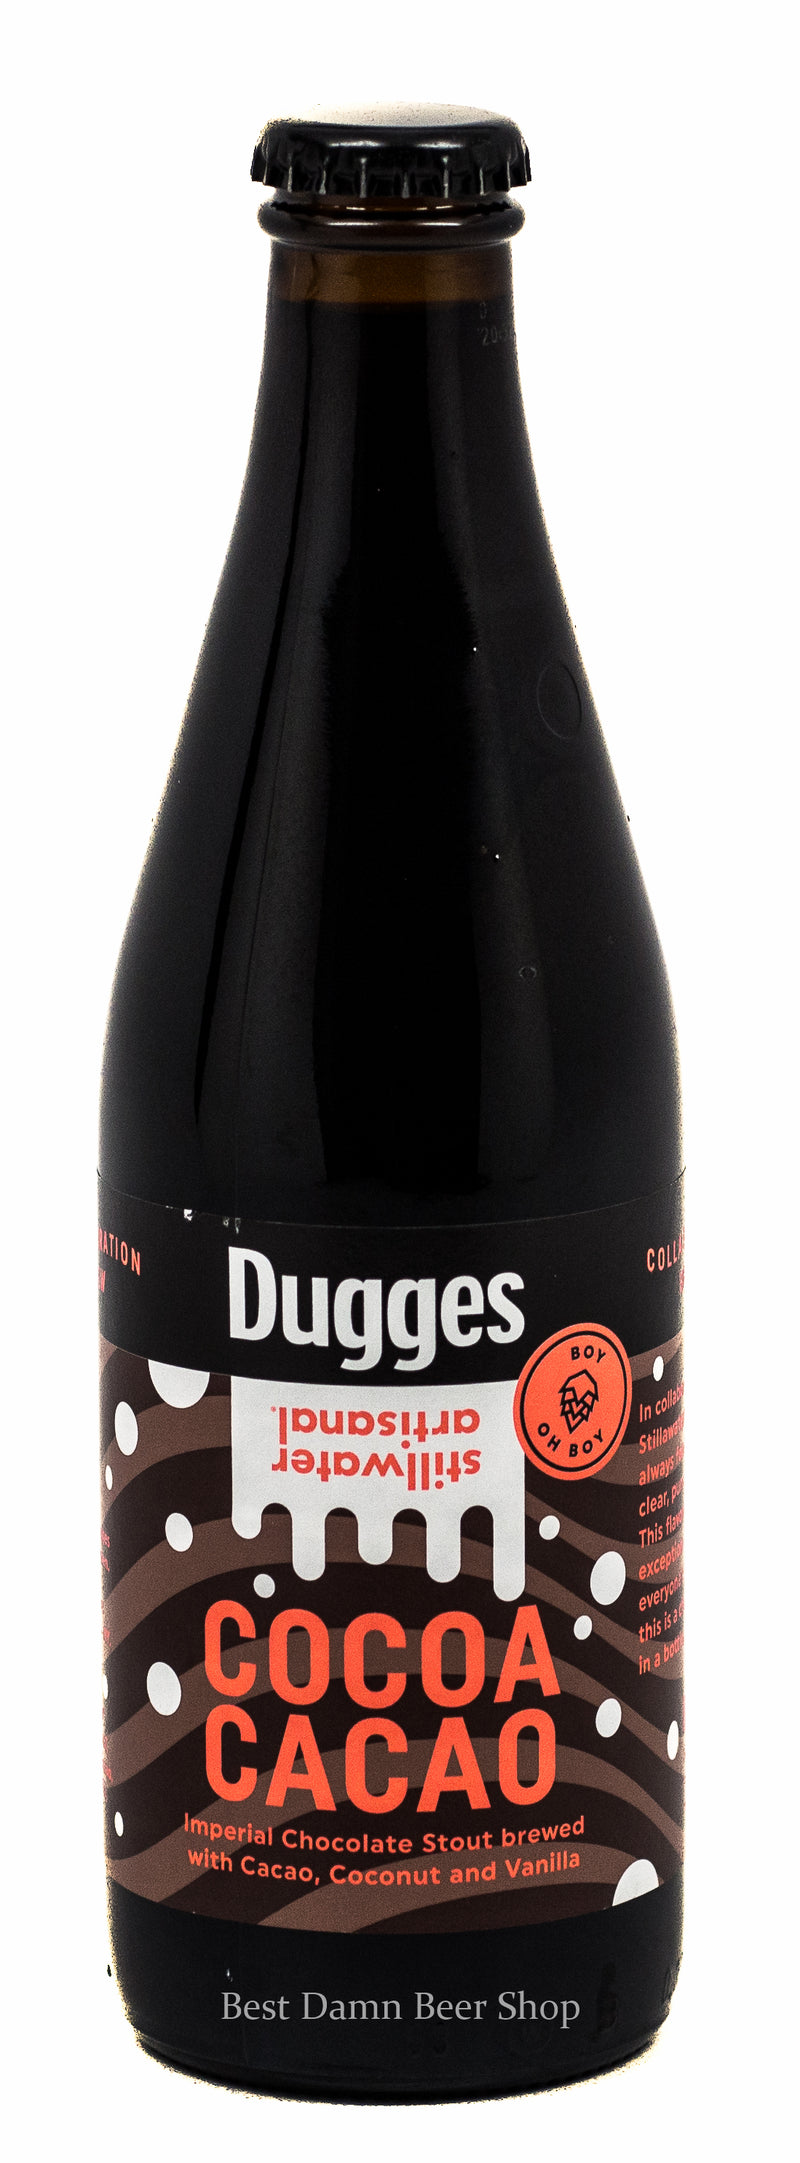 STILLWATER DUGGES COCOA CACAO IMPERIAL STOUT 11.2oz